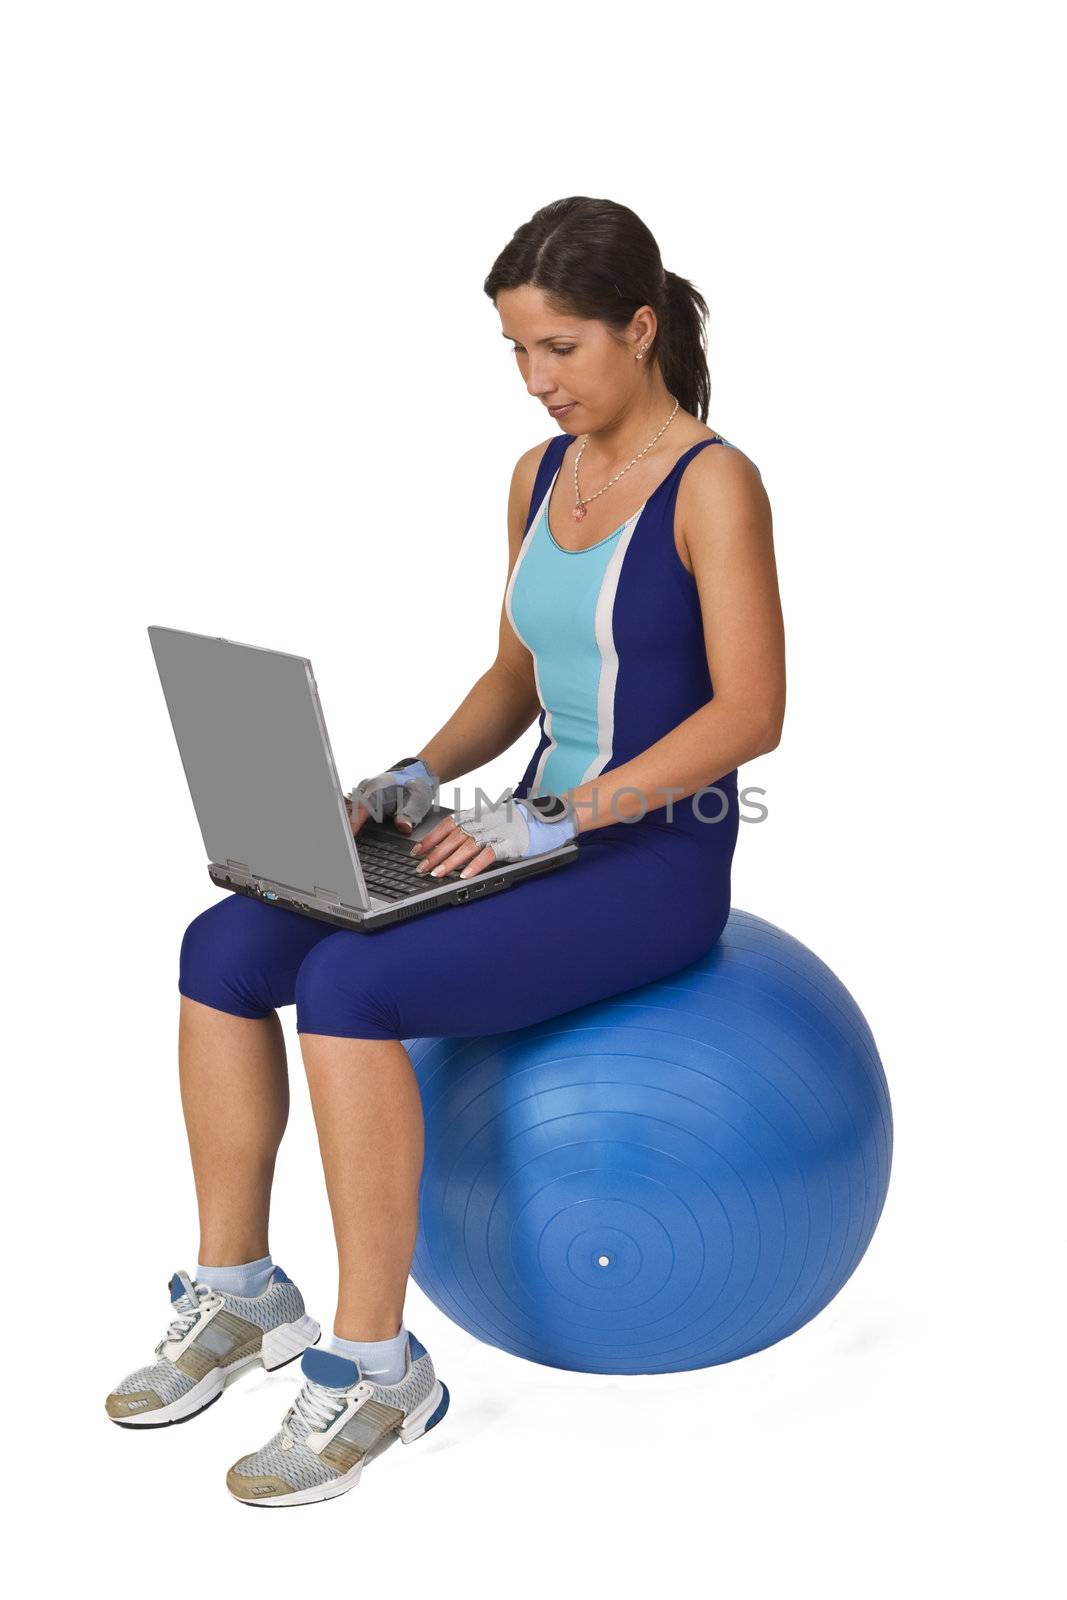 Woman in fitness equipment sitting on a gym ball and working on a laptop.Conceptual image to show the universality and mobility of technology and information.